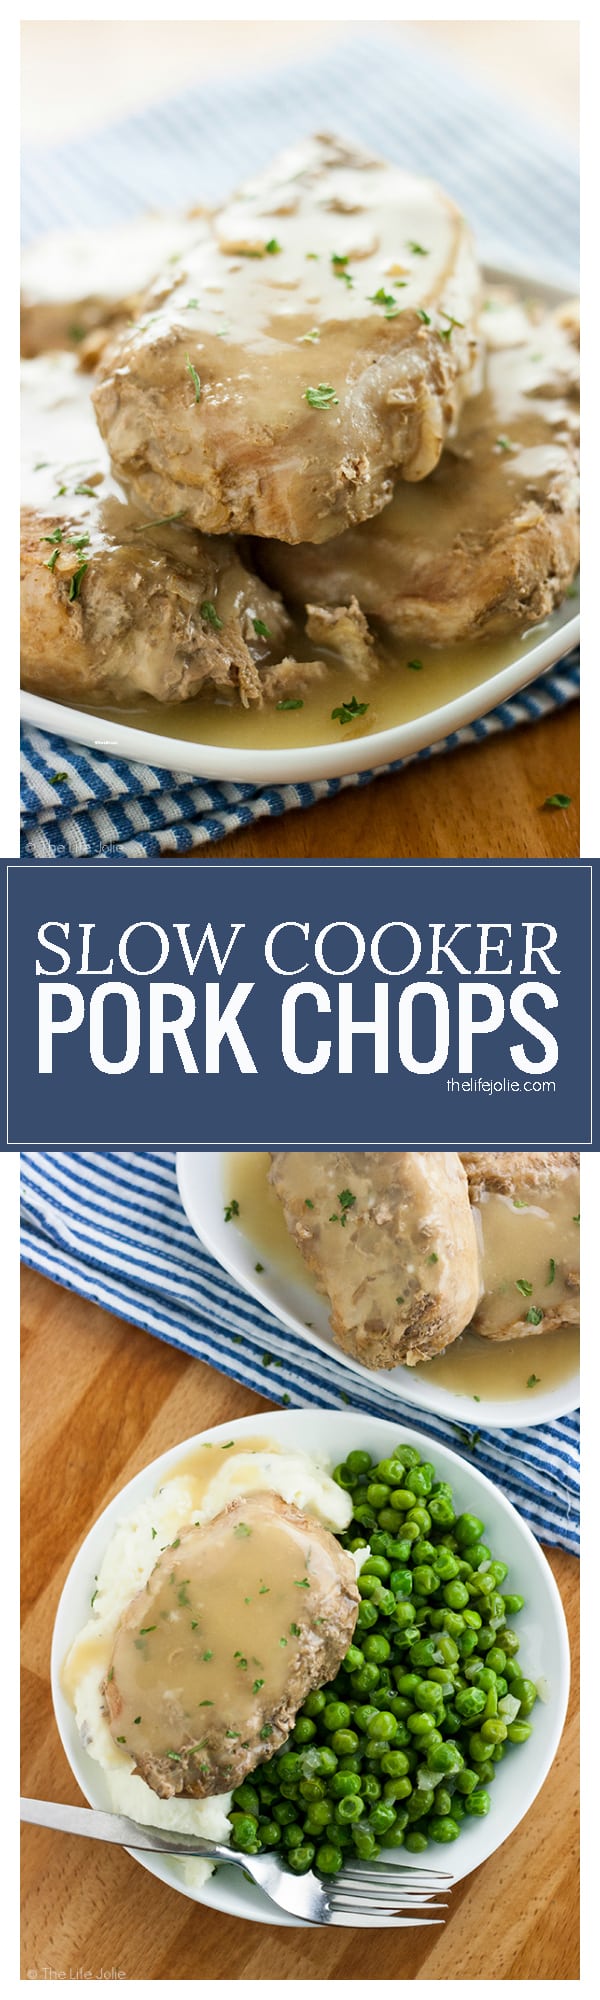 Say goodbye to overcooked pork chops! These Slow Cooker Pork Chops are the perfect weeknight and back-to-school meal! Only 3 ingredients and with minimal work, this recipe leaves you with pork chops that are fall-apart tender and savory and delicious juices that make a fantastically savory gravy!